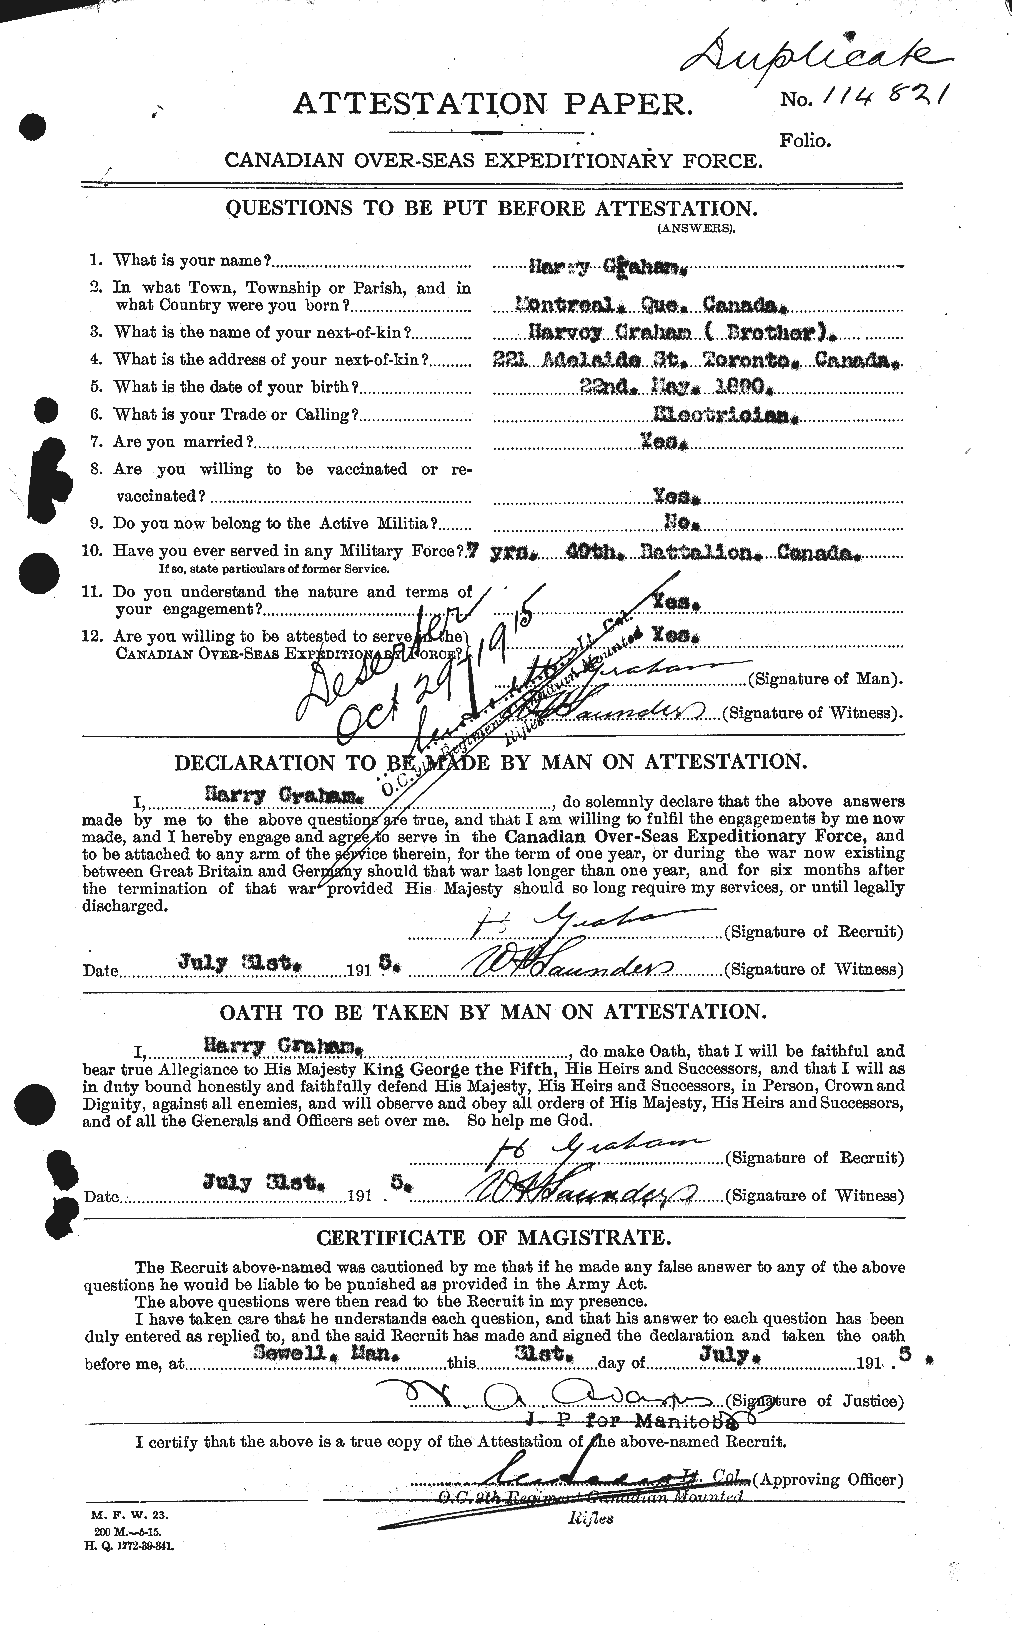 Personnel Records of the First World War - CEF 357710a